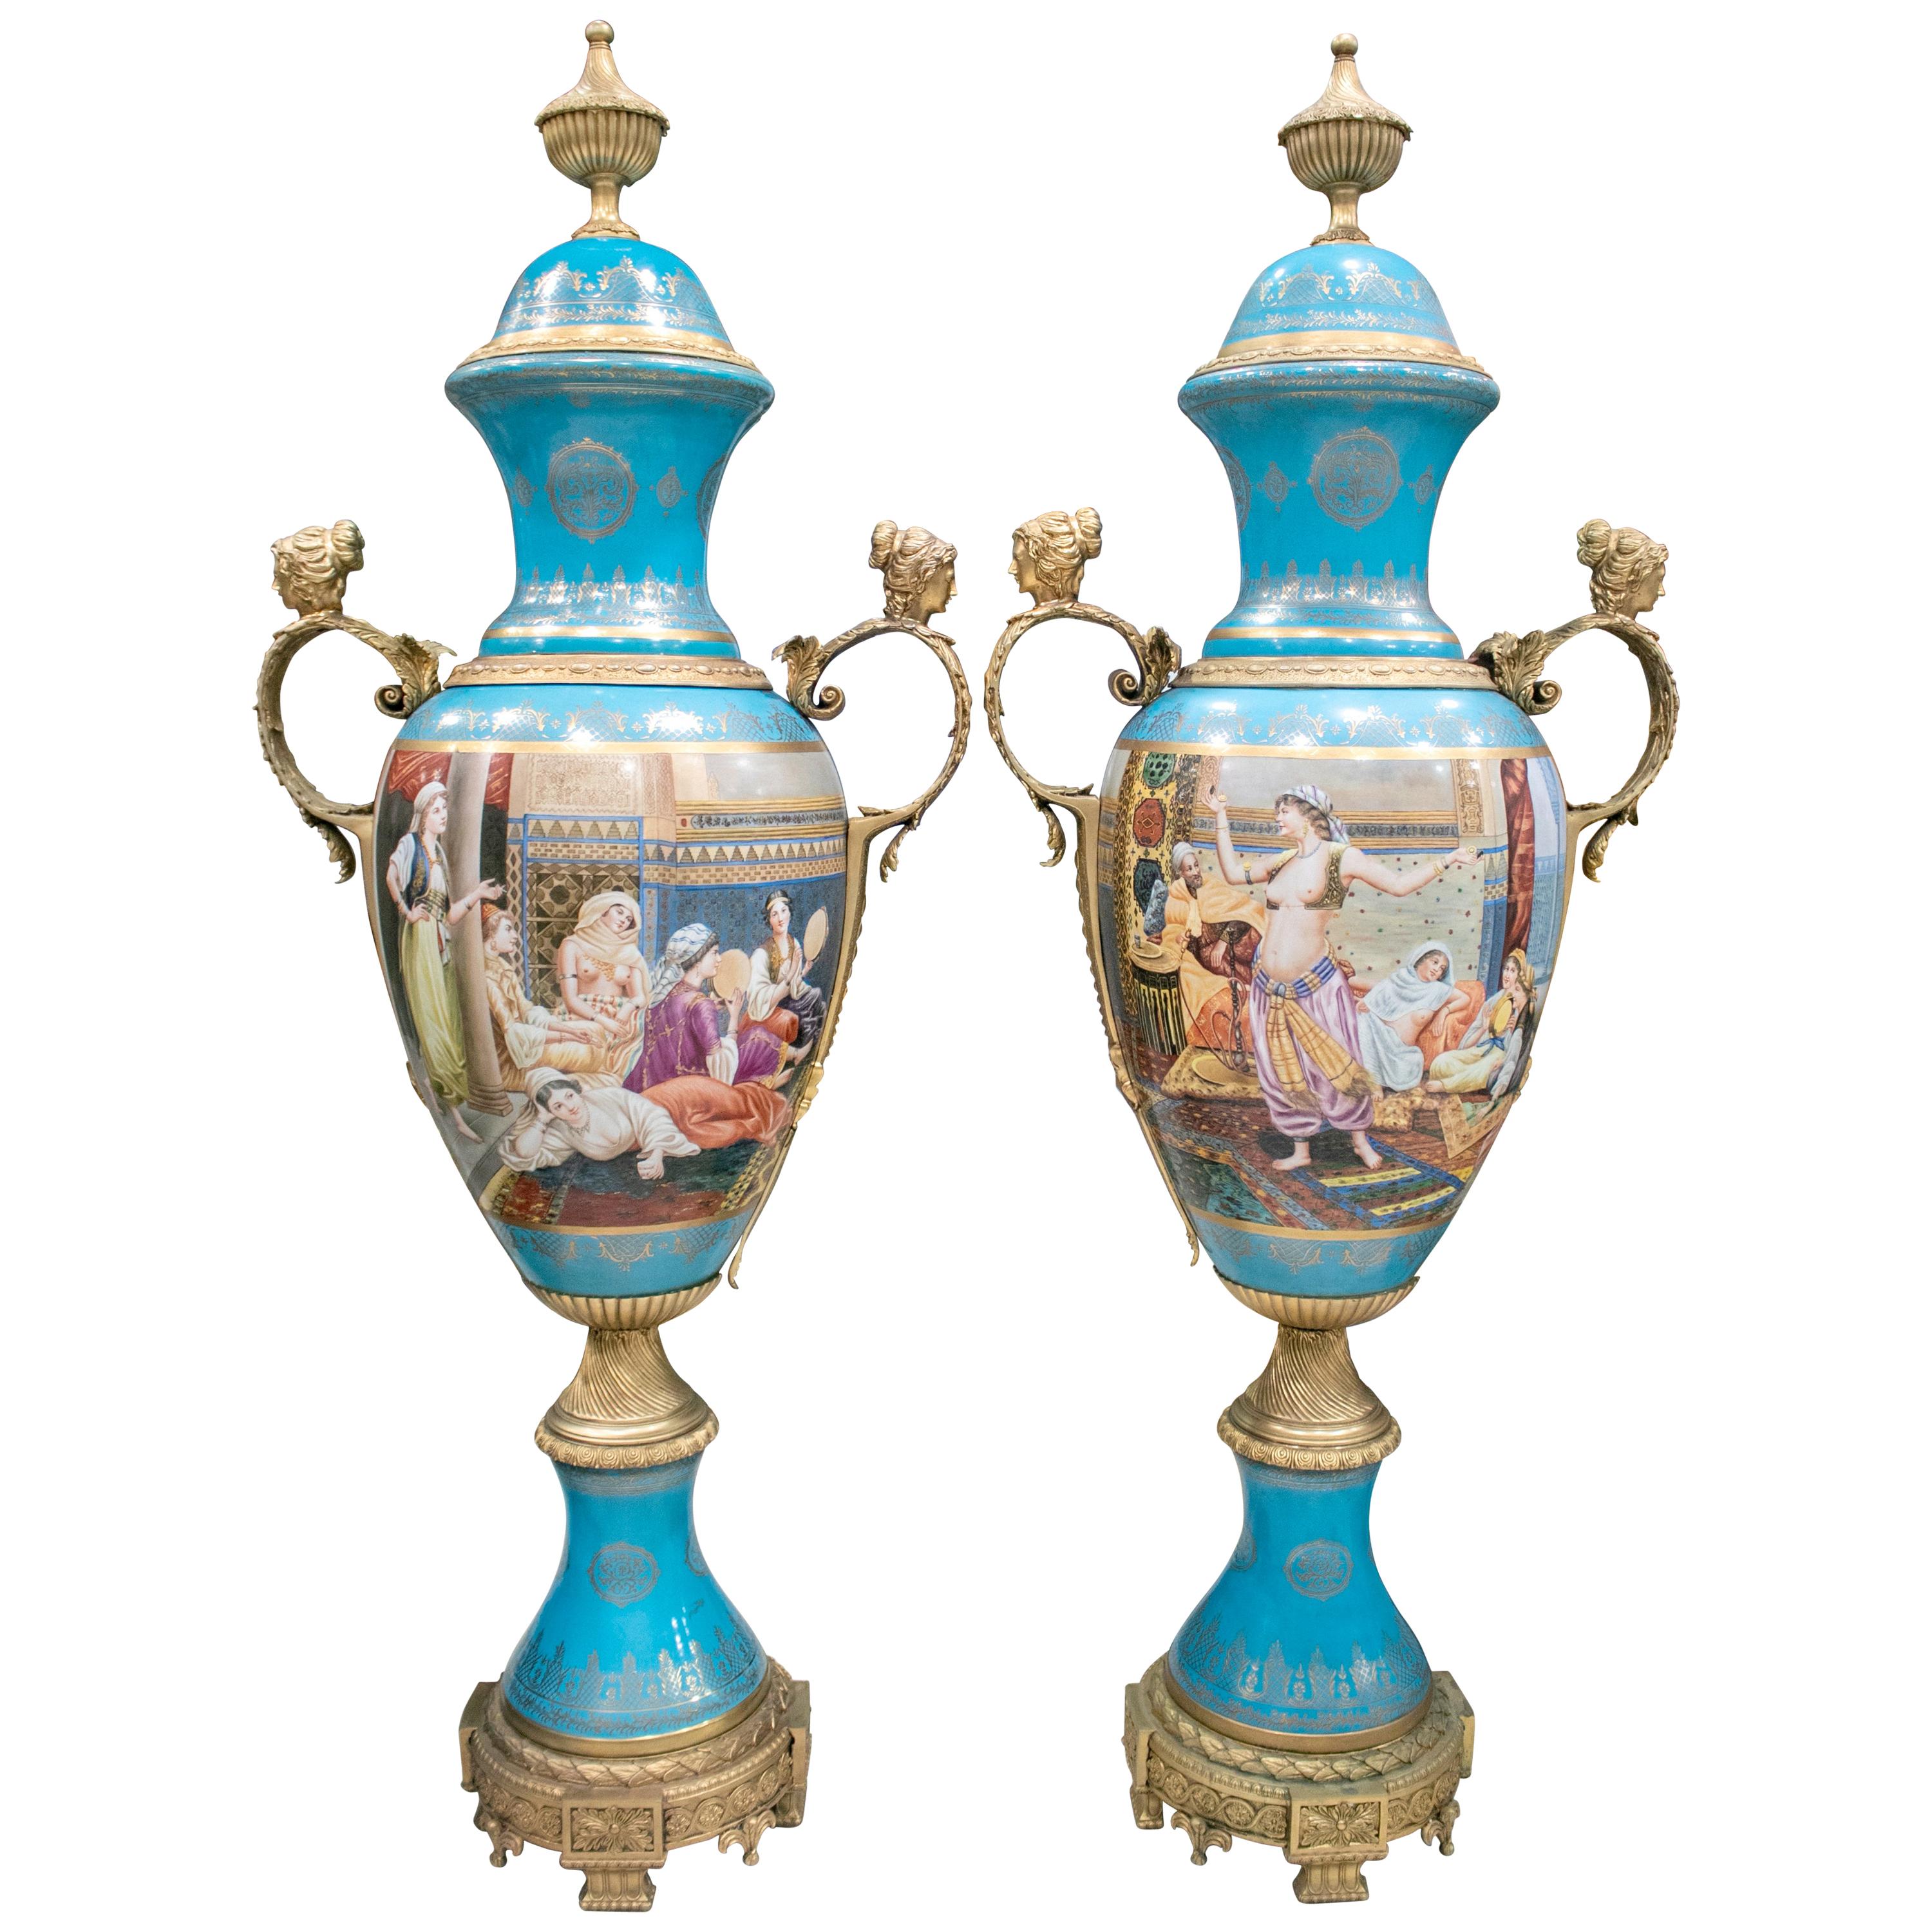 Pair of Tall Porcelain Urns Hand Painted with Orientalist Harem Scenes